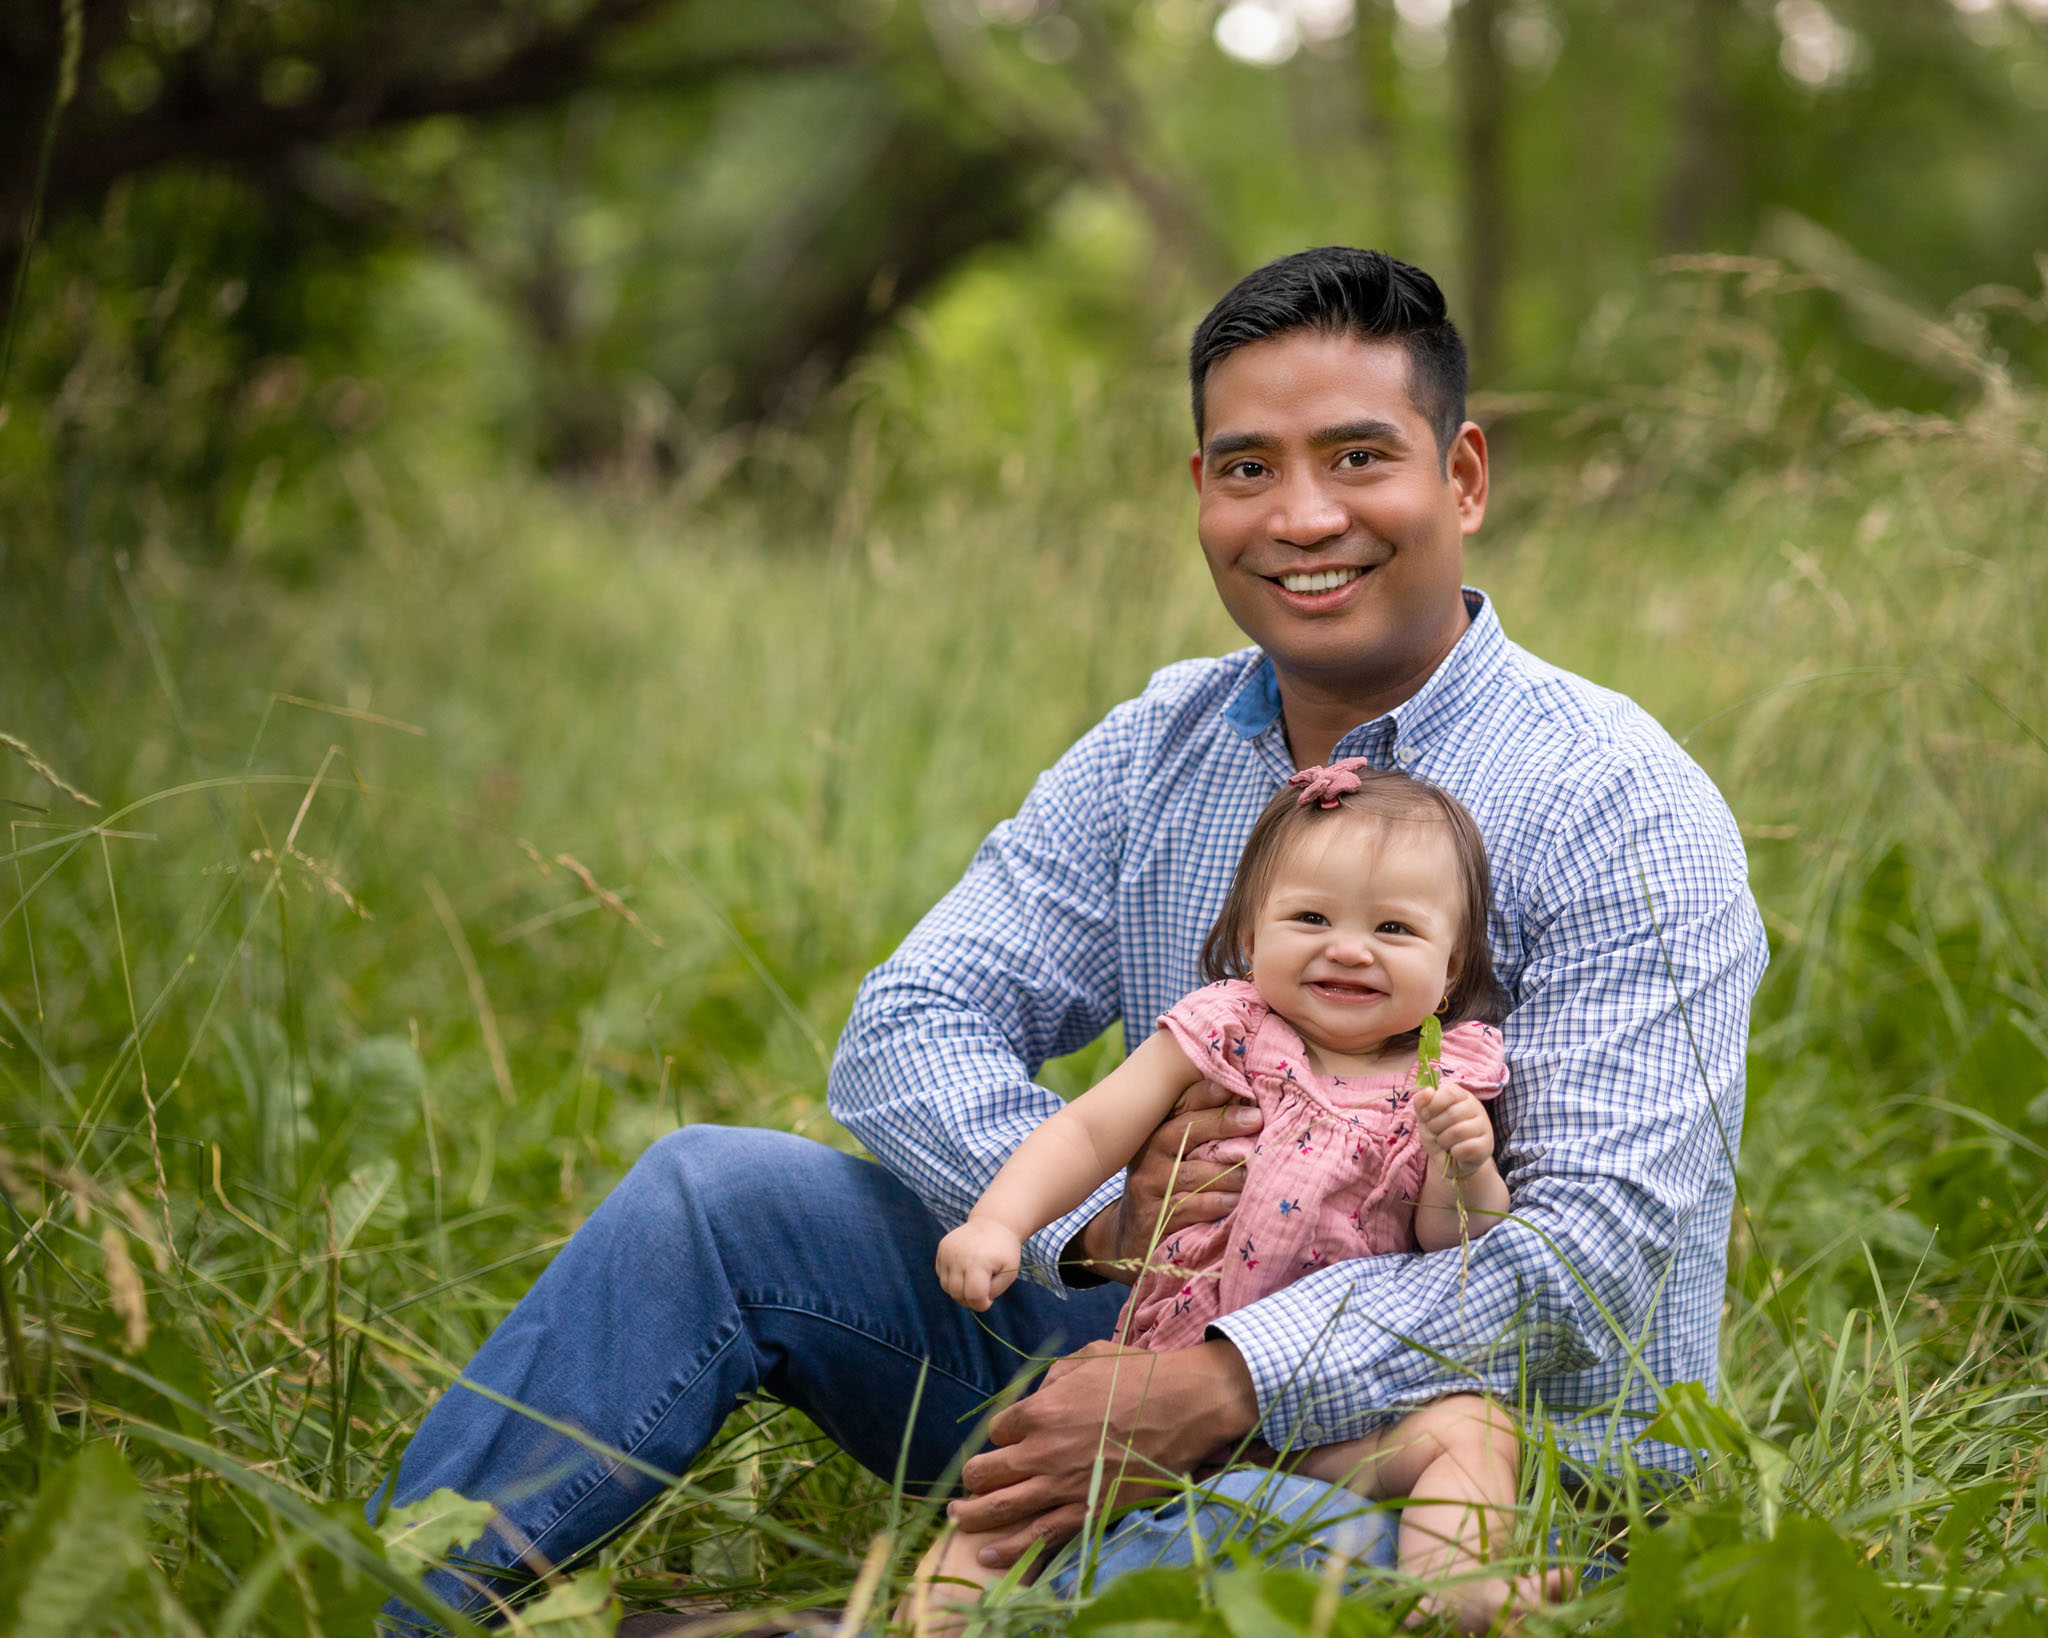 dad and baby daughter sitting in a green grass field under trees in Pueblo CO